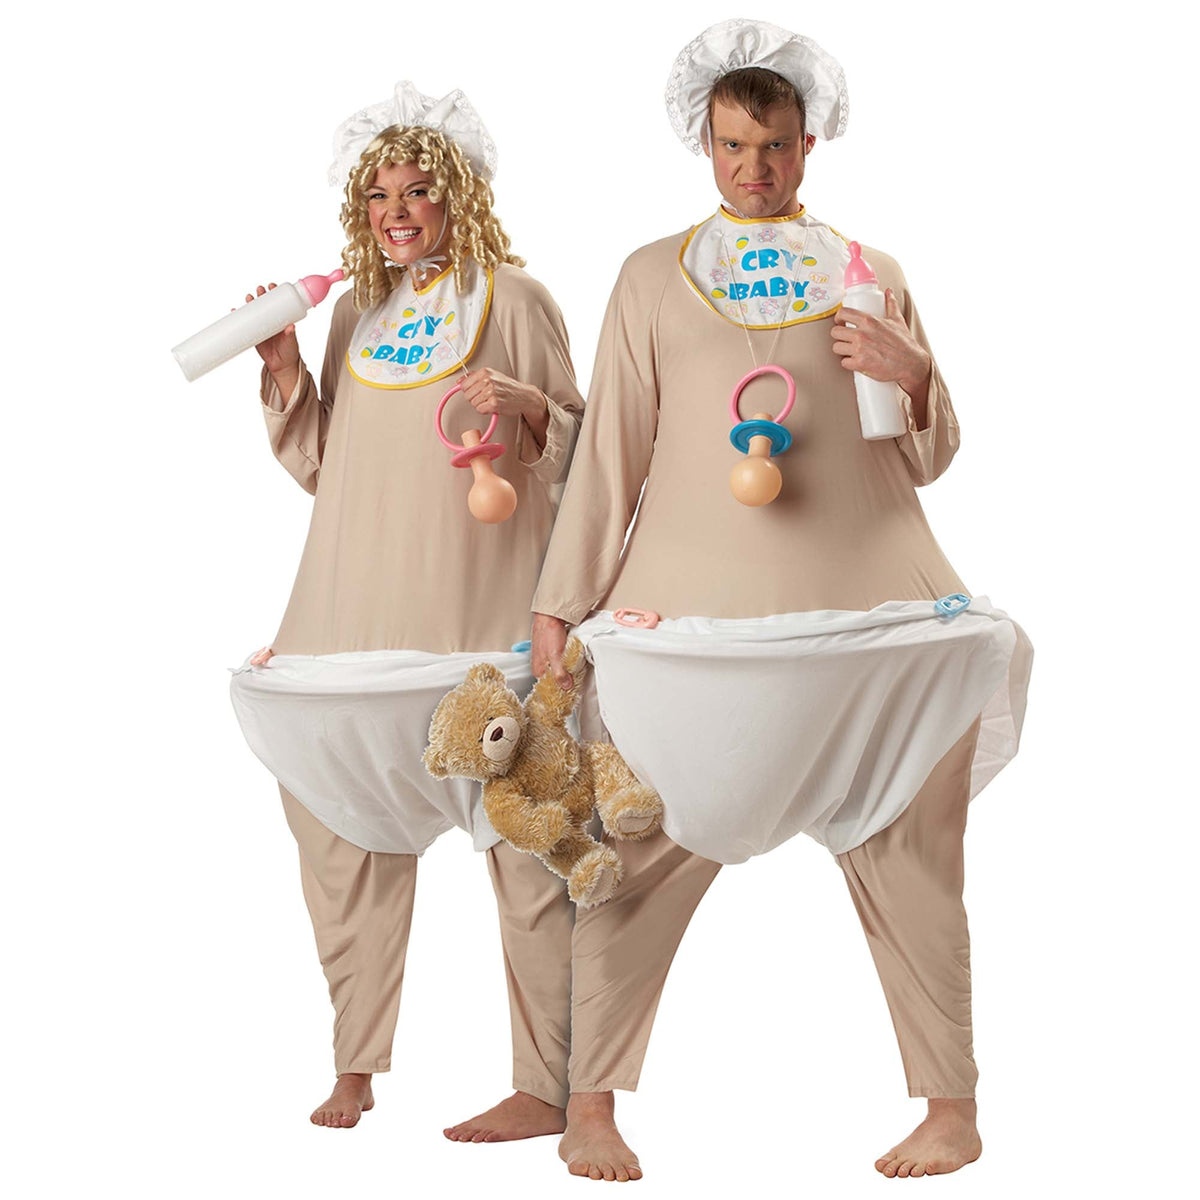 CALIFORNIA COSTUMES Costumes Cry Baby Costume for Adults